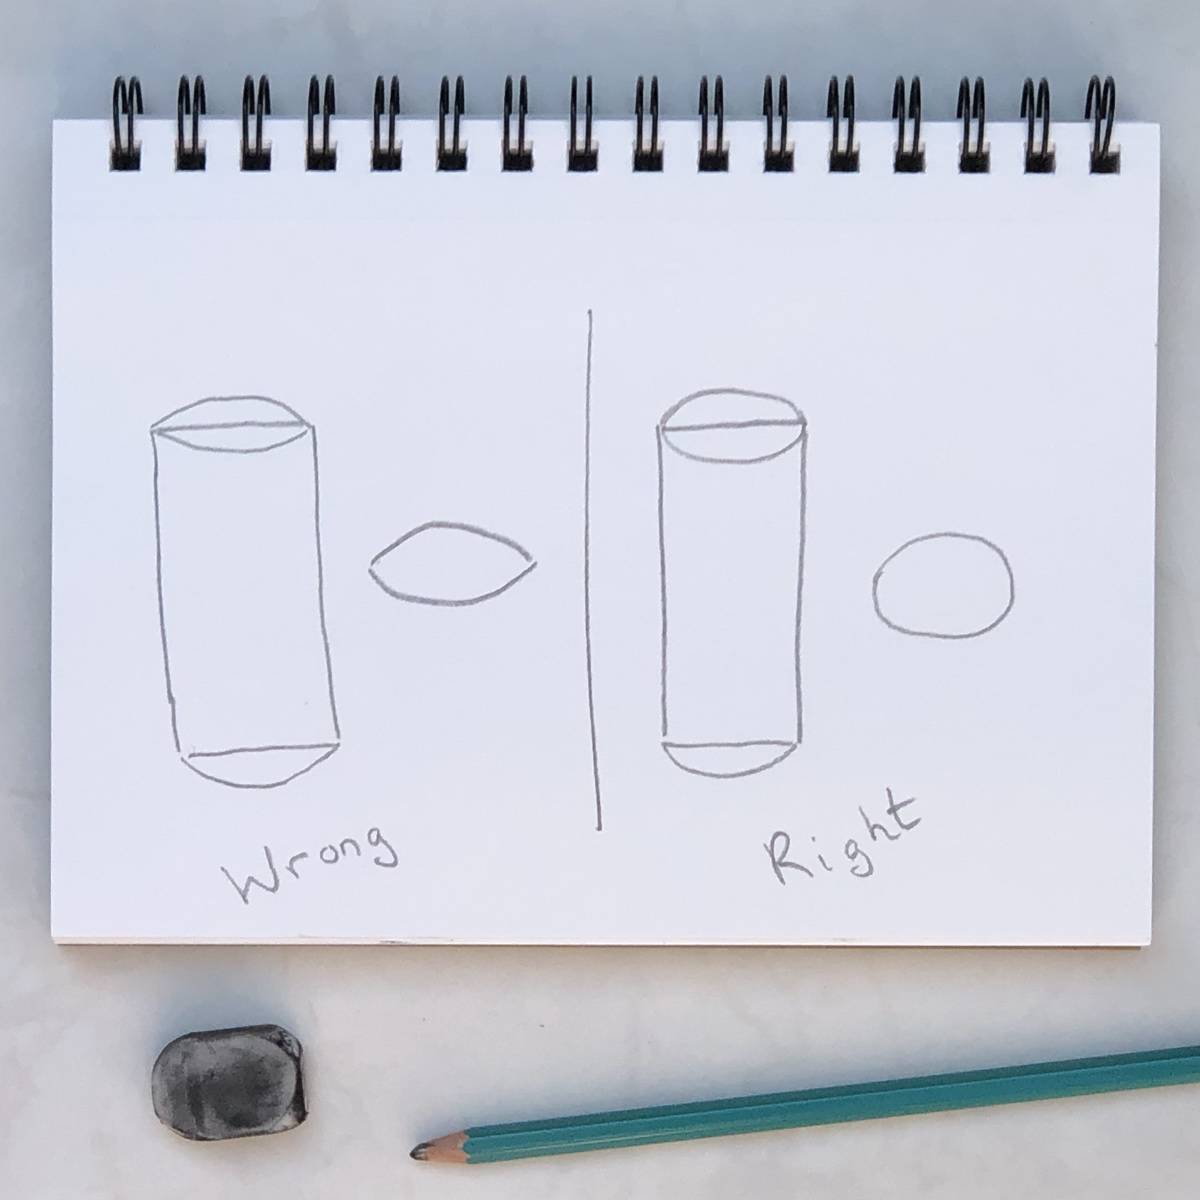 How not to draw cylinder with pointy ended arcs which would look like almond shape when looking down from top